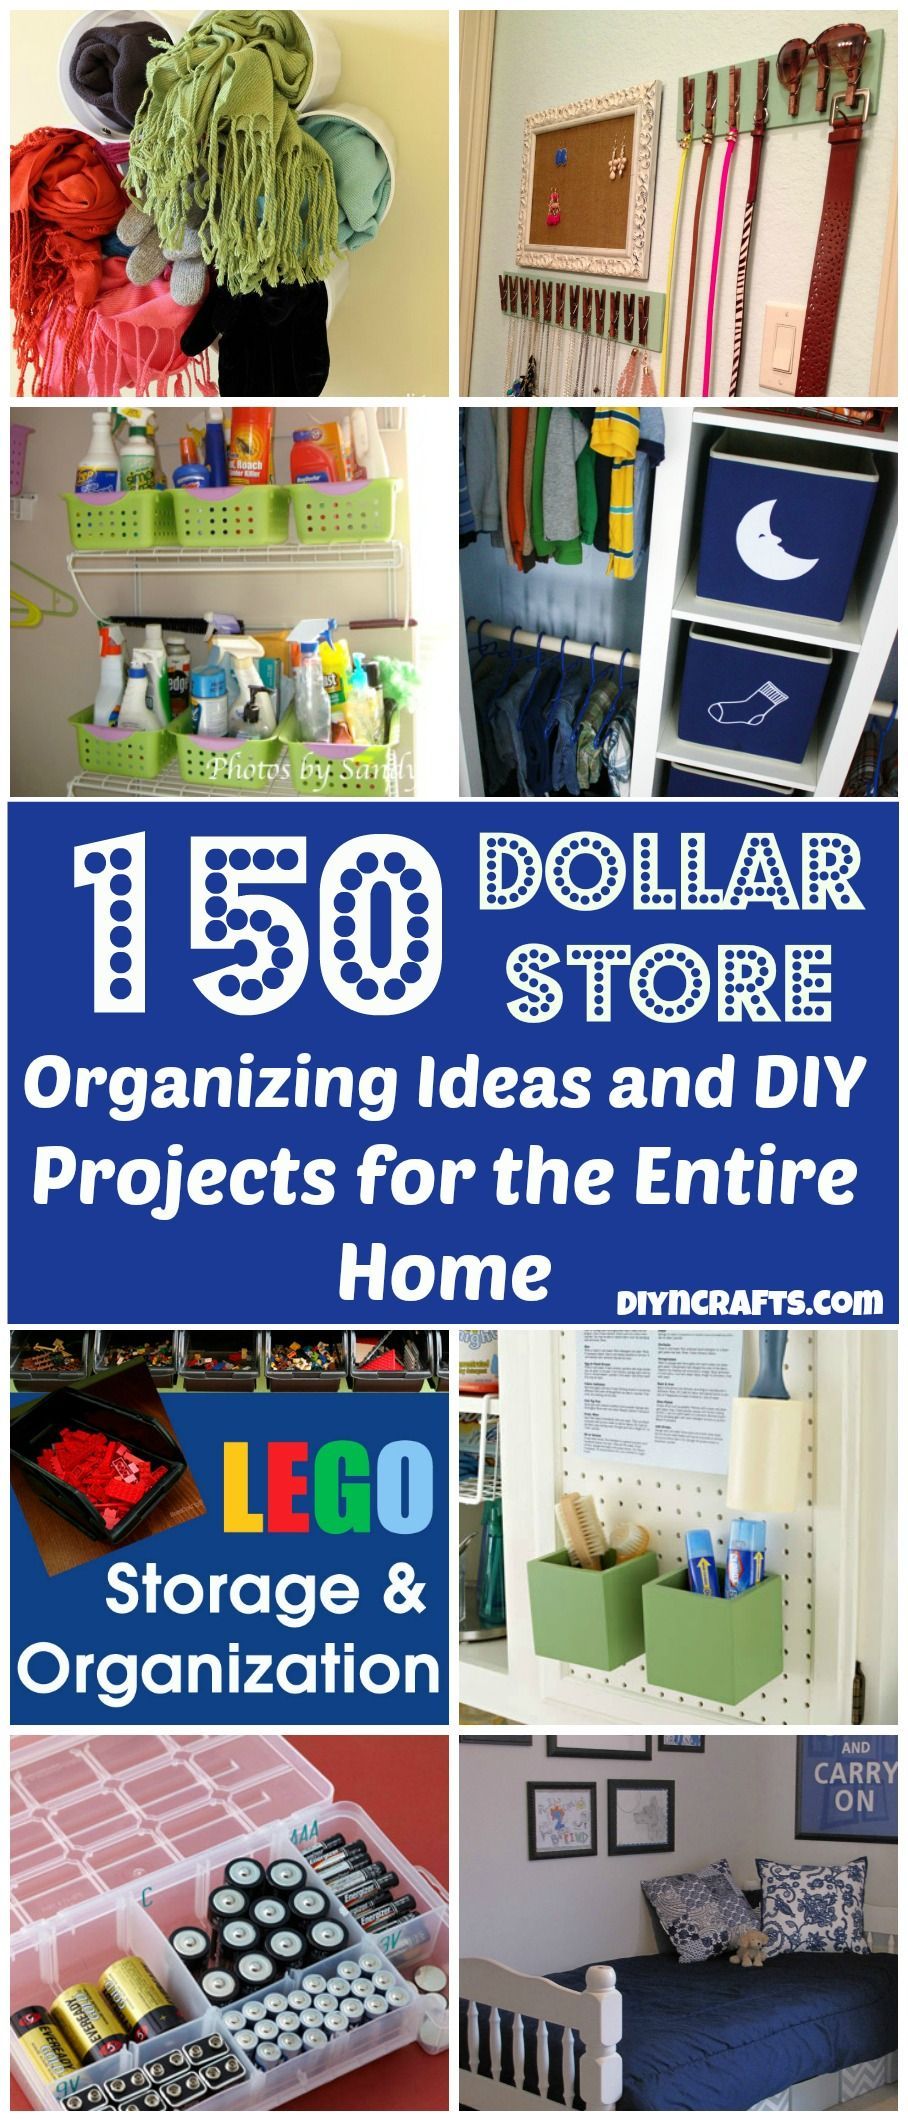 150 ways to organize your entire home using dollar store items! So many remarkab